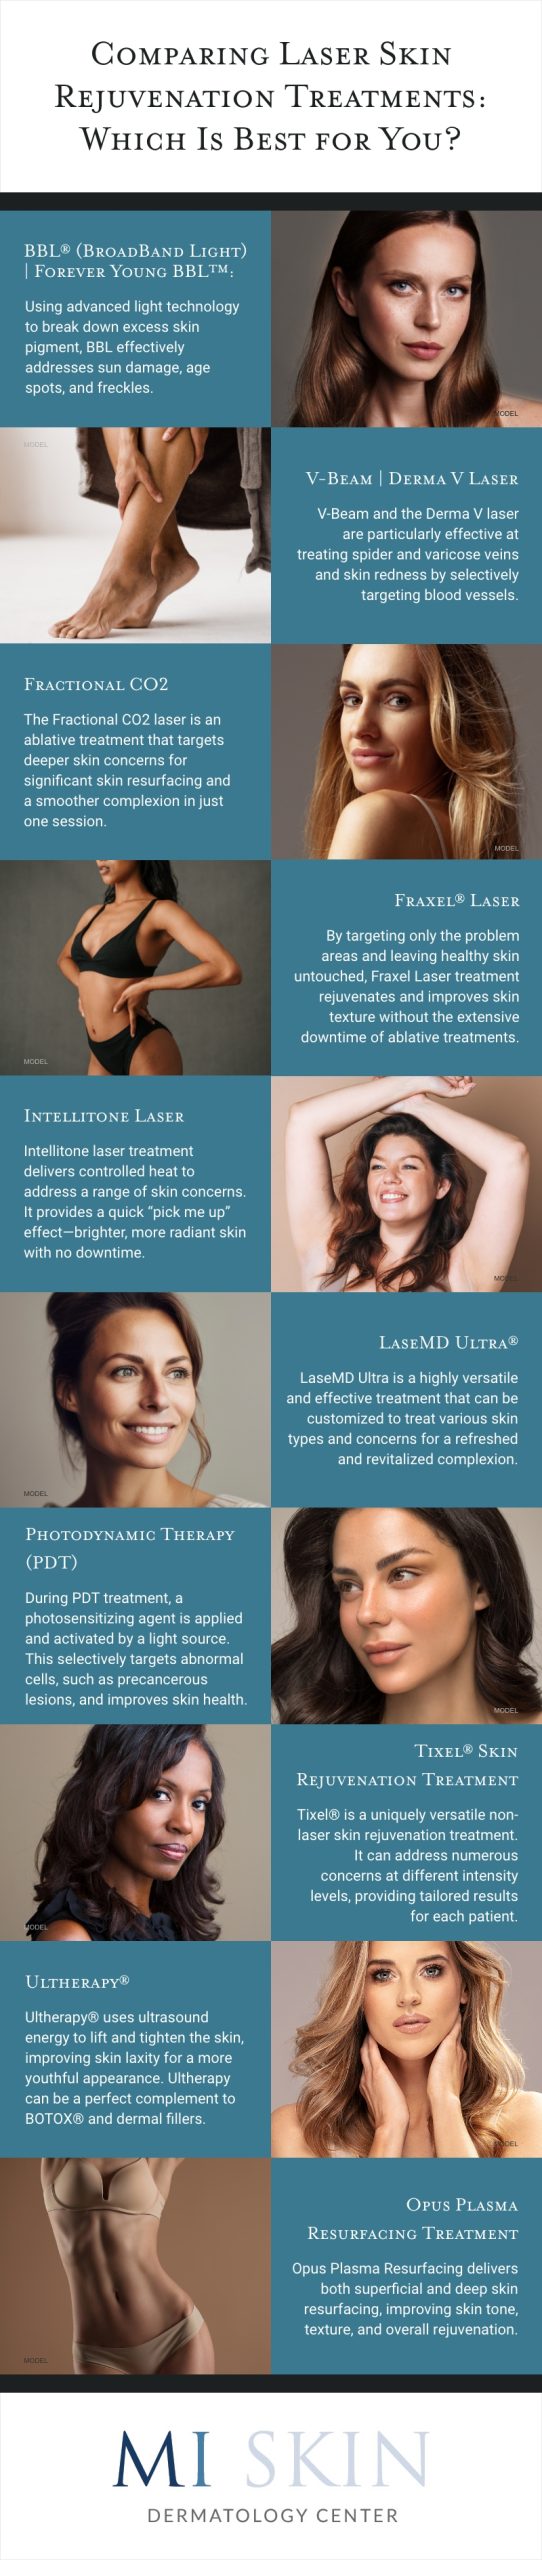 Instagraphic comparing the different laser skin treatments and which is best for you.